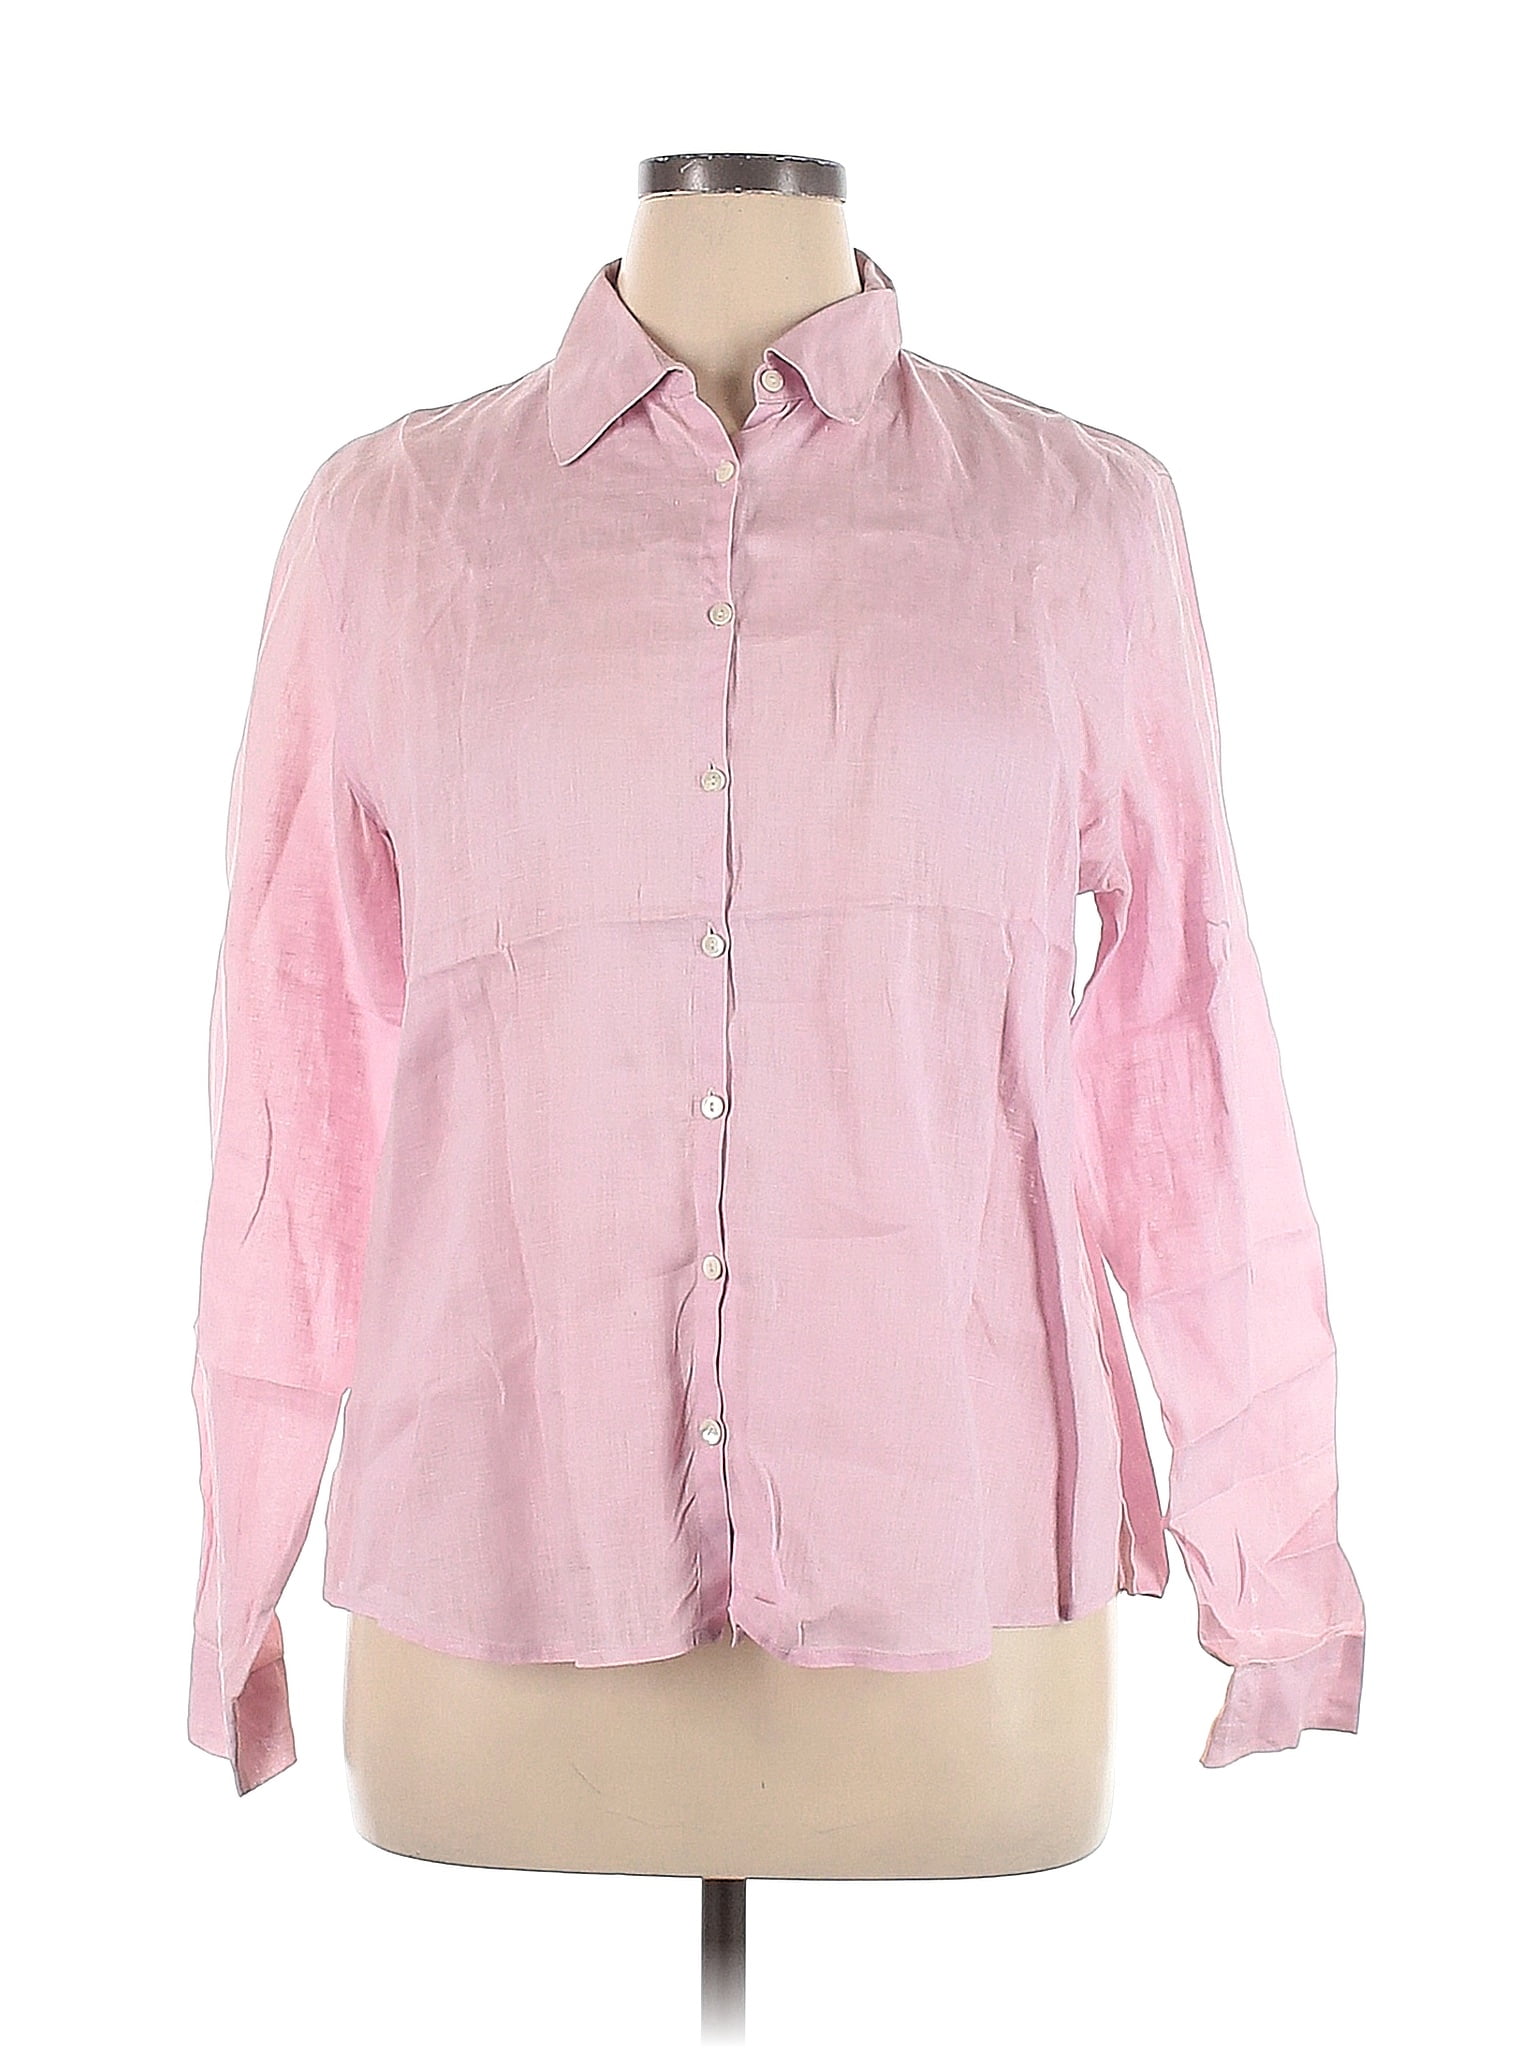 Brooks Brothers 346 100% Linen Pink Long Sleeve Button-Down Shirt Size ...